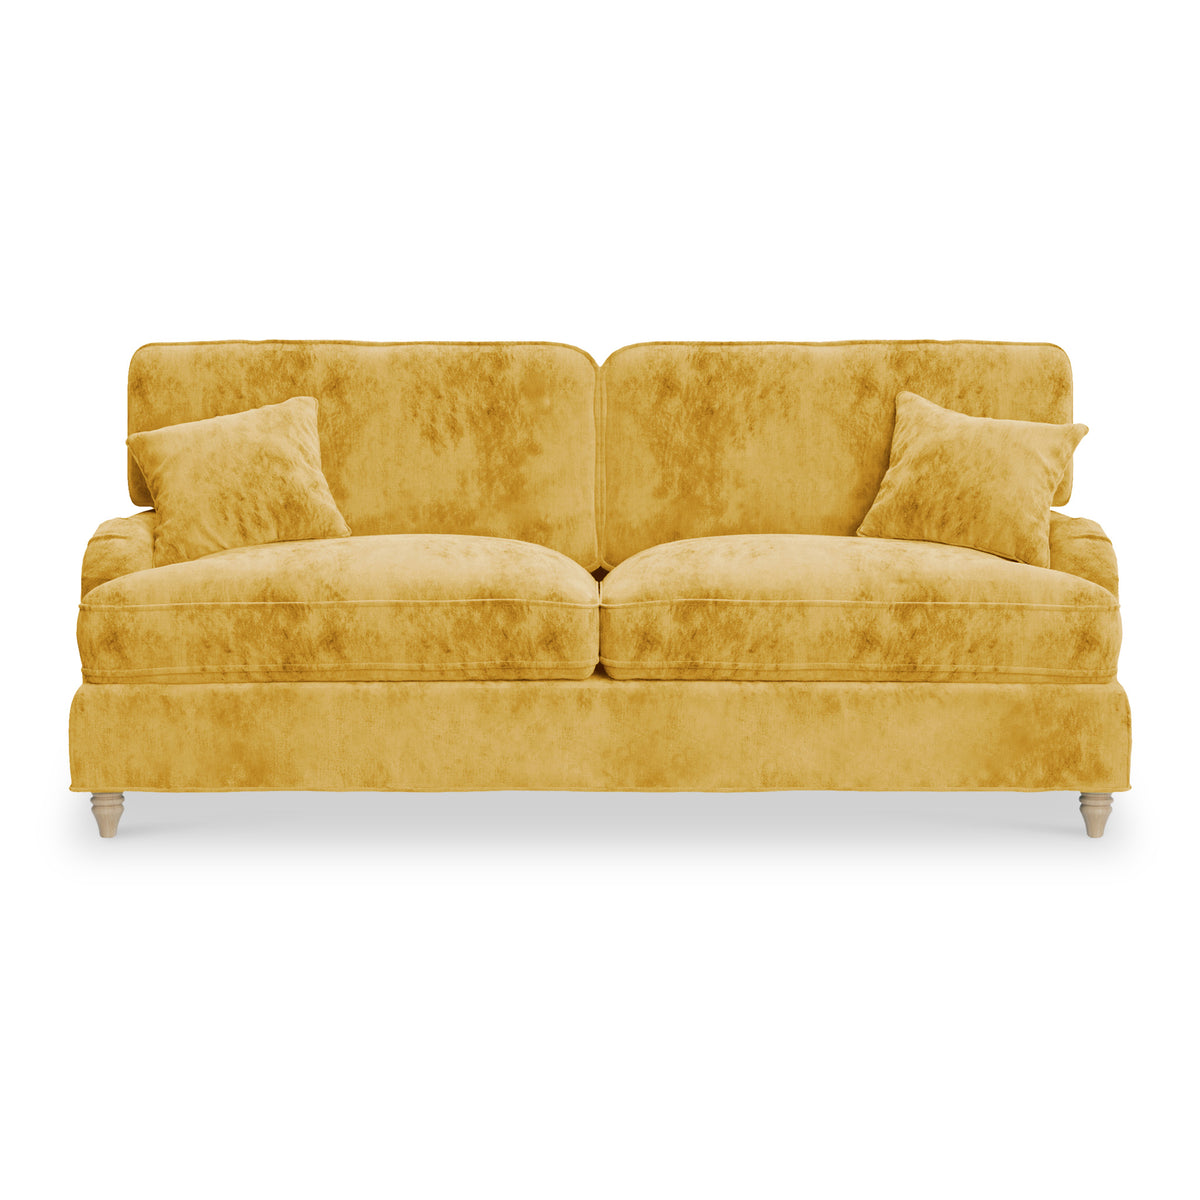 Arthur Gold 4 Seater Sofa from Roseland Furniture